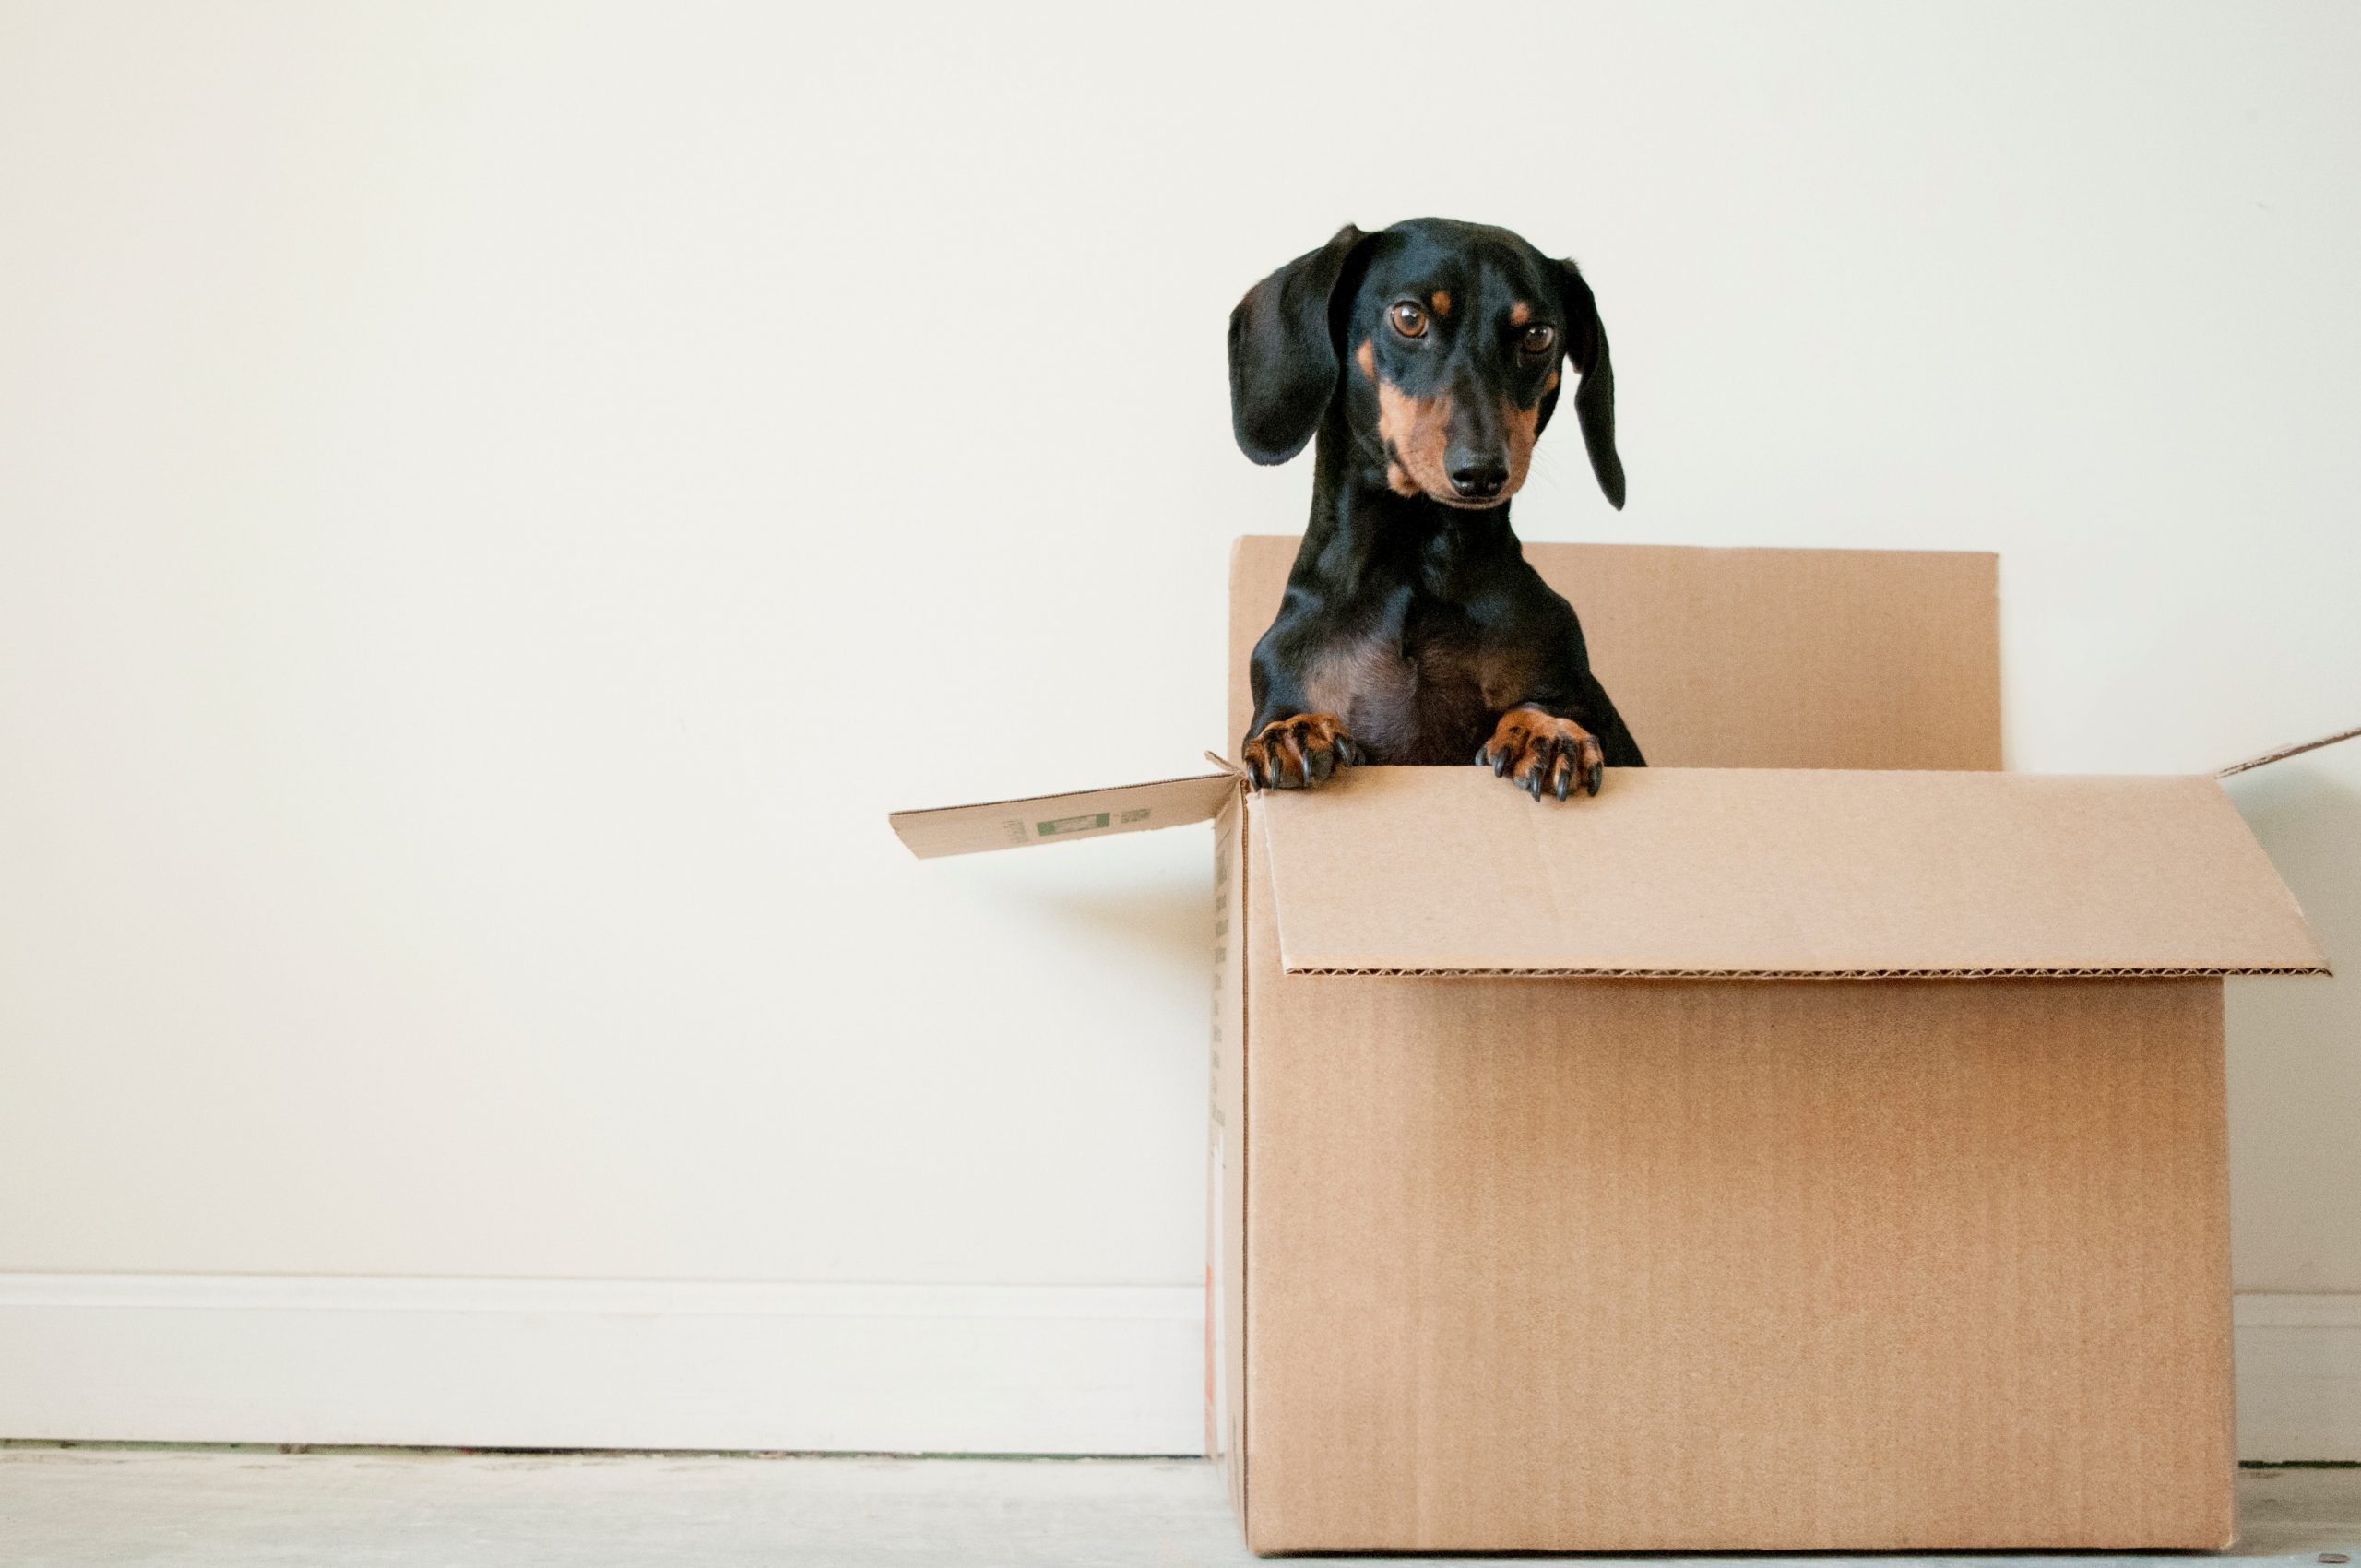 Moving is a stressful time, especially when you have a pet. On top of all the basic challenges of a move, you have to find a way to relocate without causing your dog too much anxiety. Our guide will cover your options for relocating with a pet (including international moves) and tips to help you acclimate your pup to their new home.